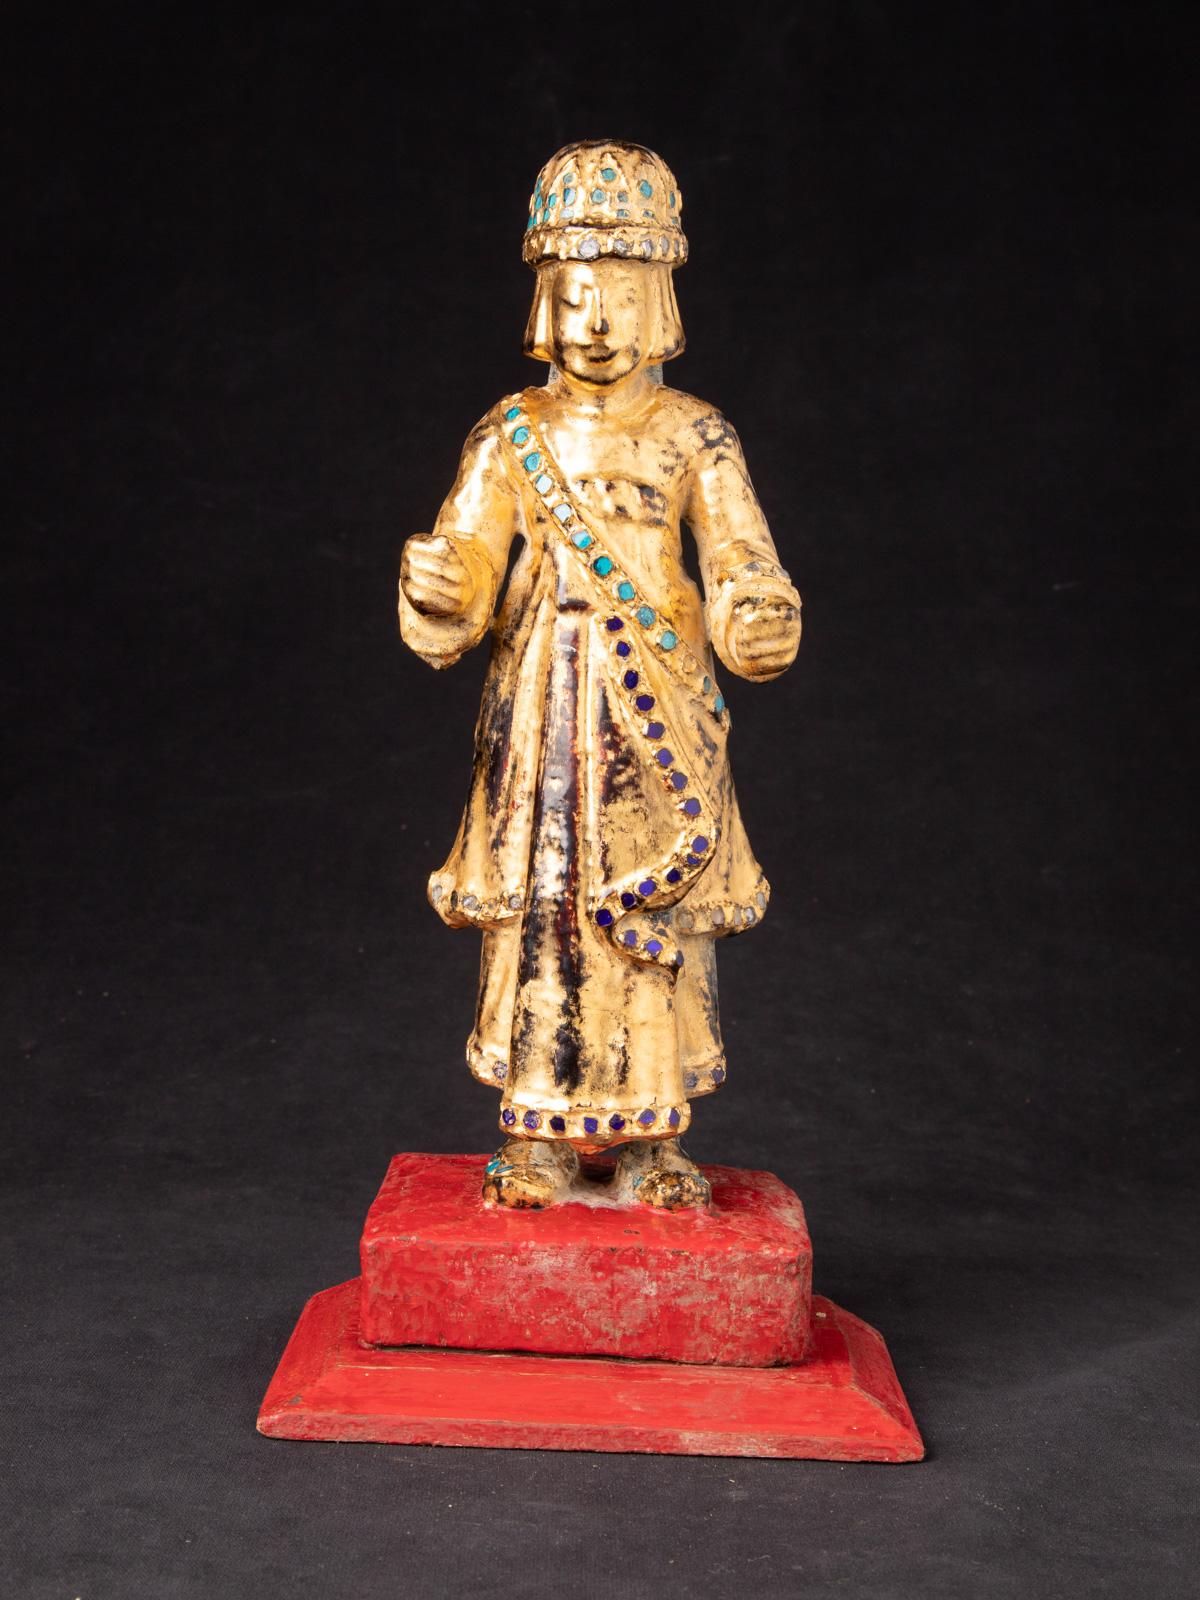 This wooden piece, originating from Burma during the middle of the 19th century, is a fine example of Mandalay style craftsmanship. It stands at a height of 29.5 cm and boasts dimensions of 15 cm in width and 10.8 cm in depth, making it a compact